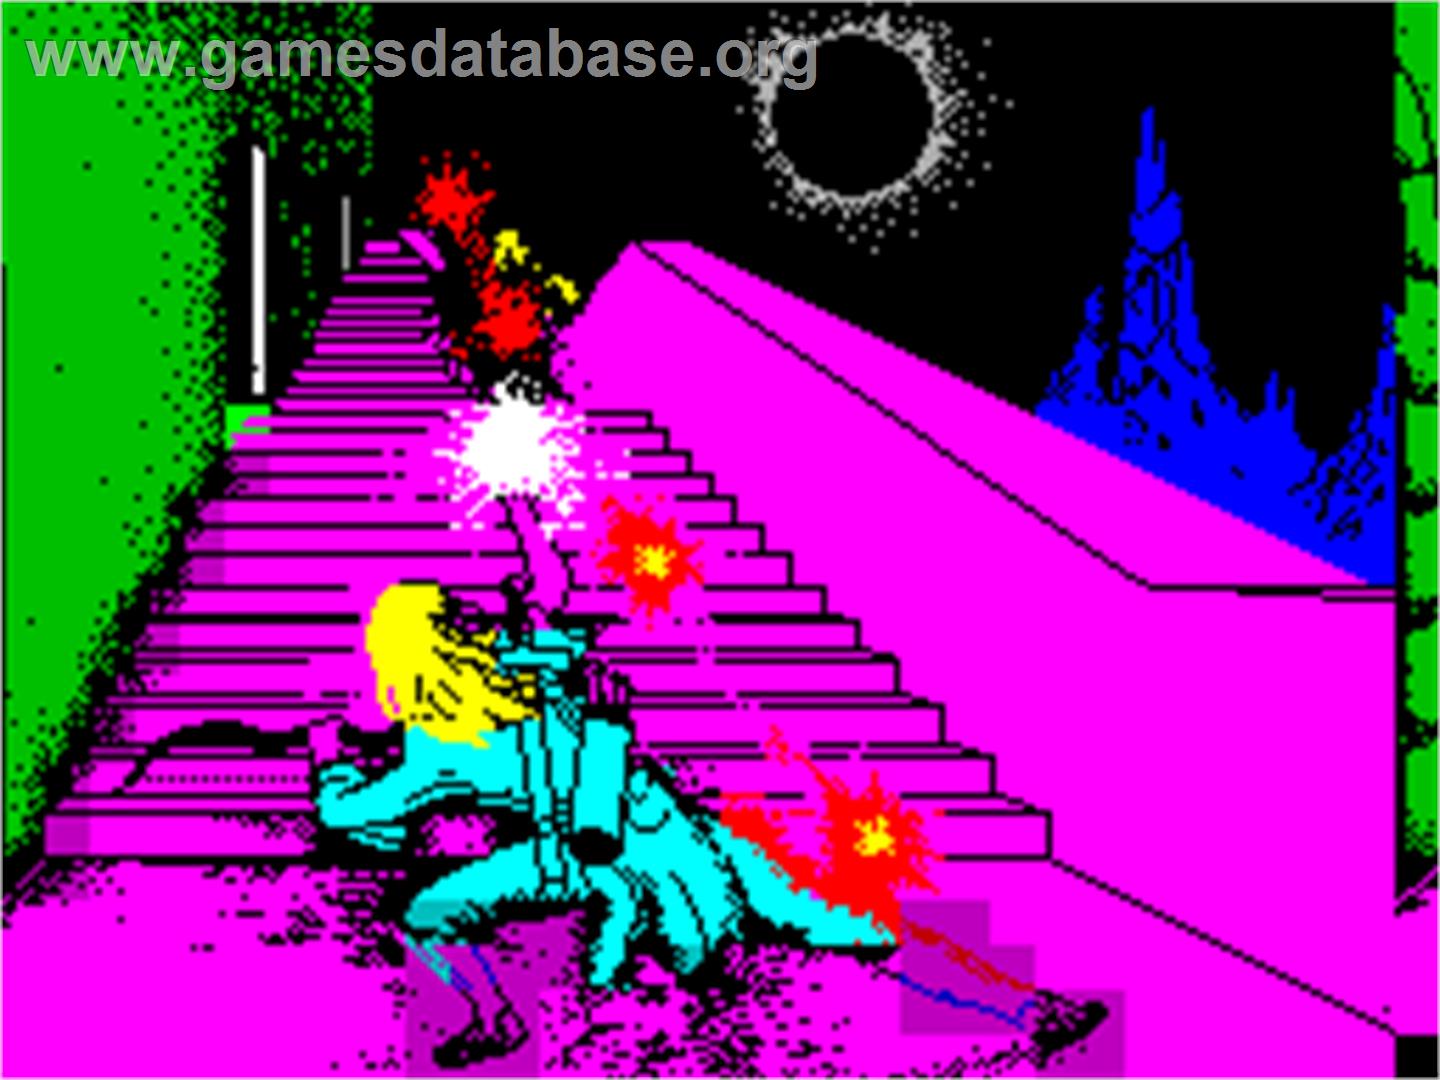 Halls of the Things - Sinclair ZX Spectrum - Artwork - Title Screen